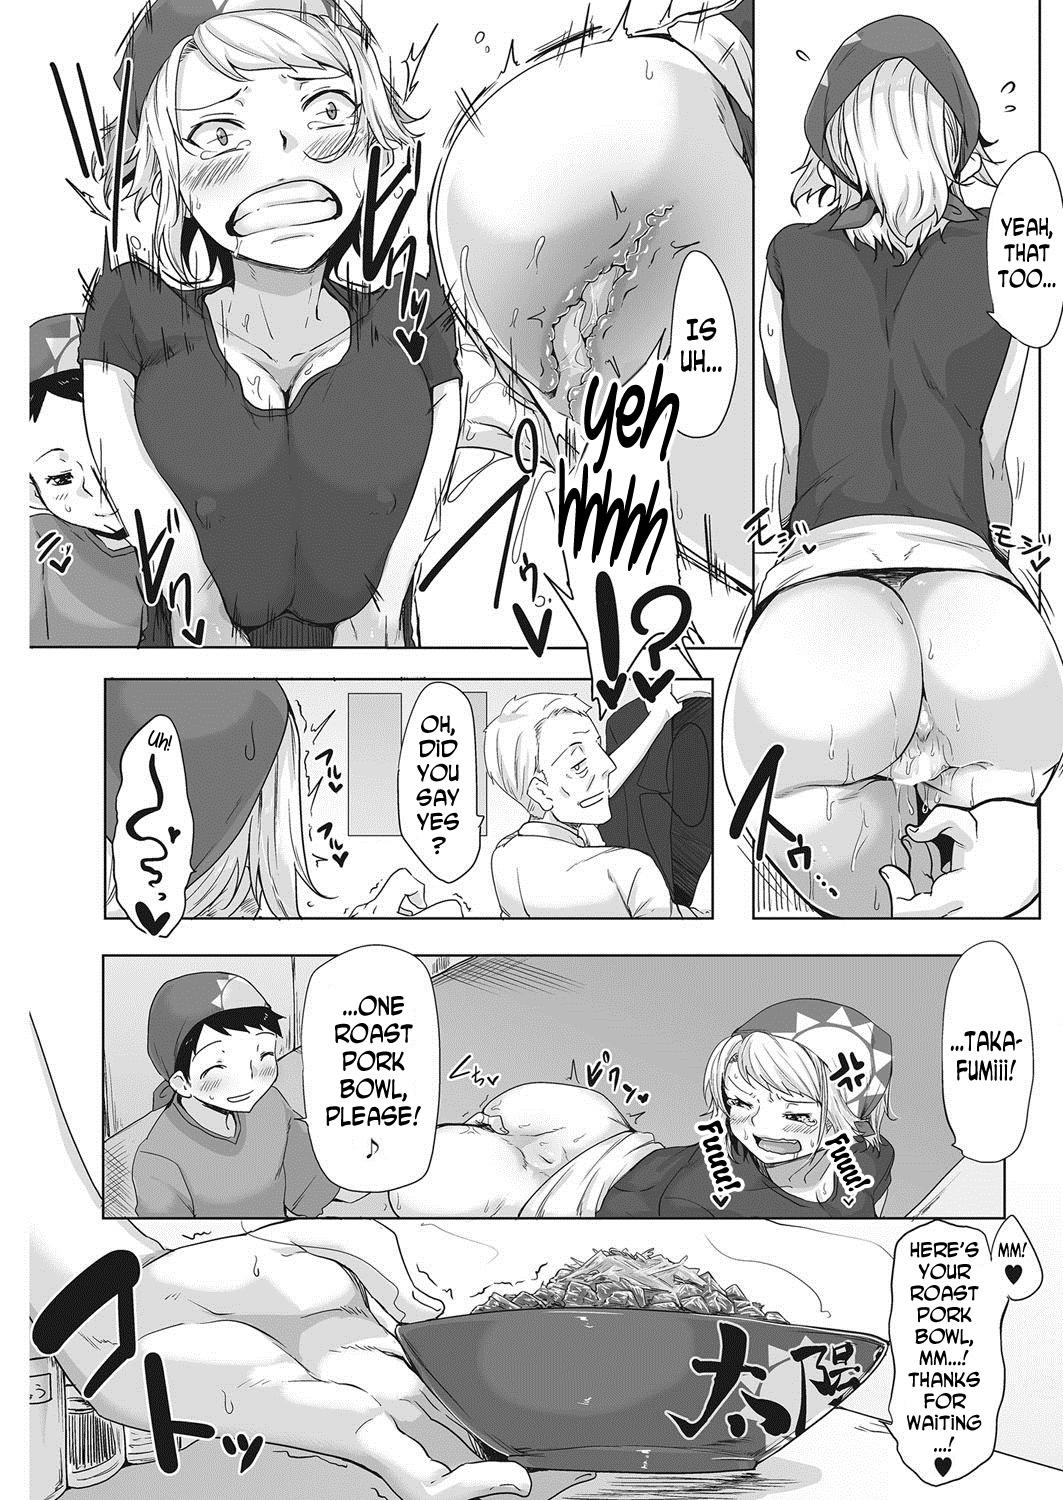 Latin Youkoso Taiyouken e! | Welcome to Taiyouken Piercing - Page 9